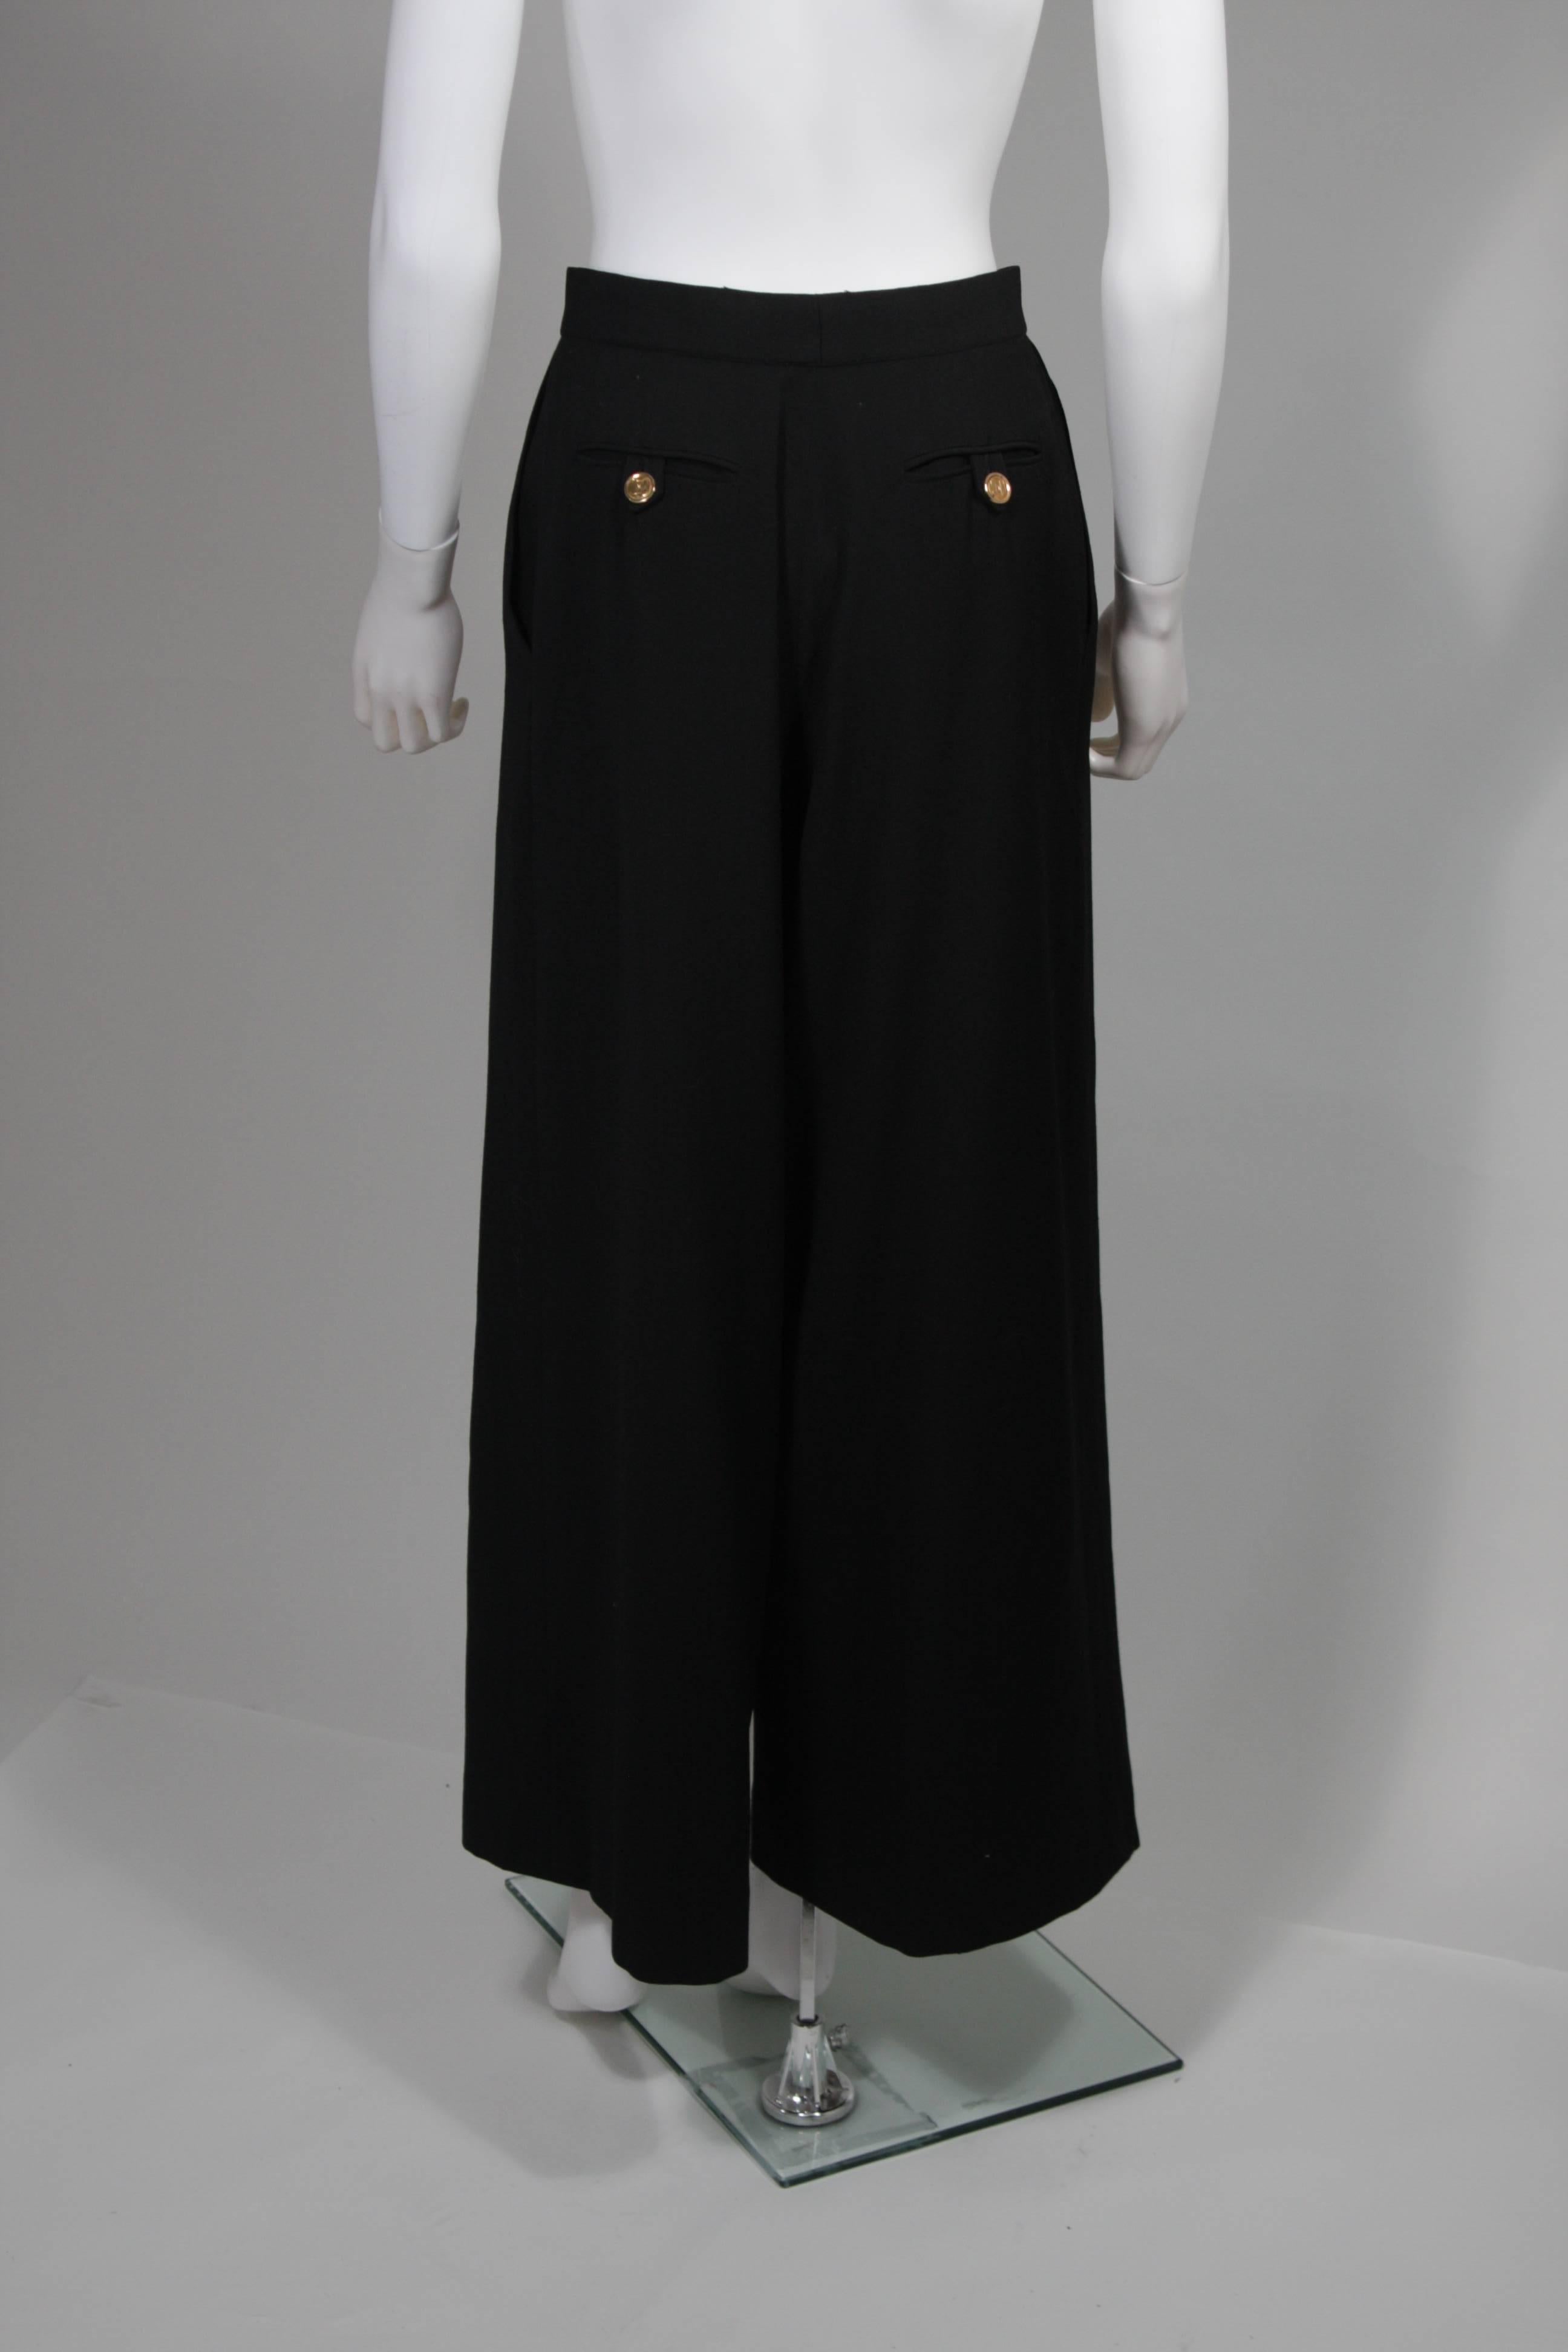 Chanel Black Wide Leg Pleated Slacks with Gold hardware Size Small 26 4